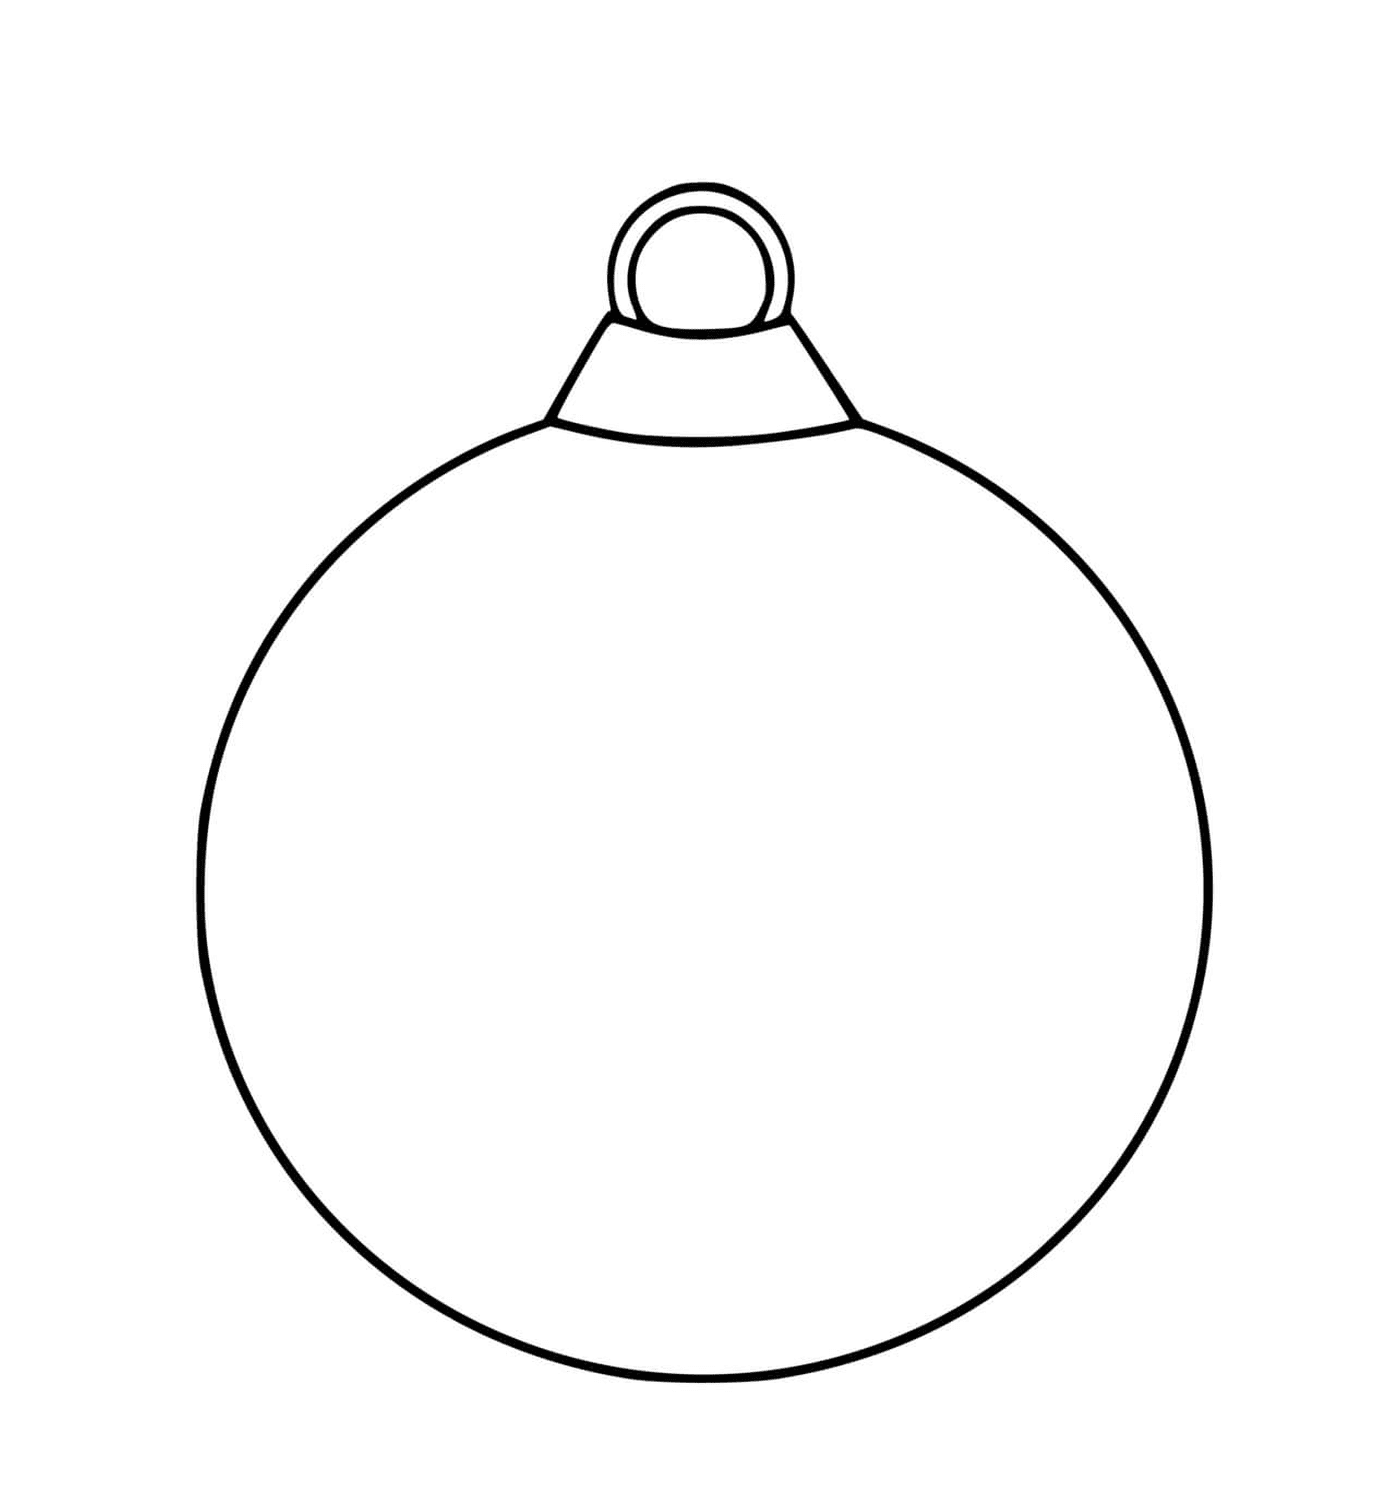  An empty Christmas ball with a simple black outline 